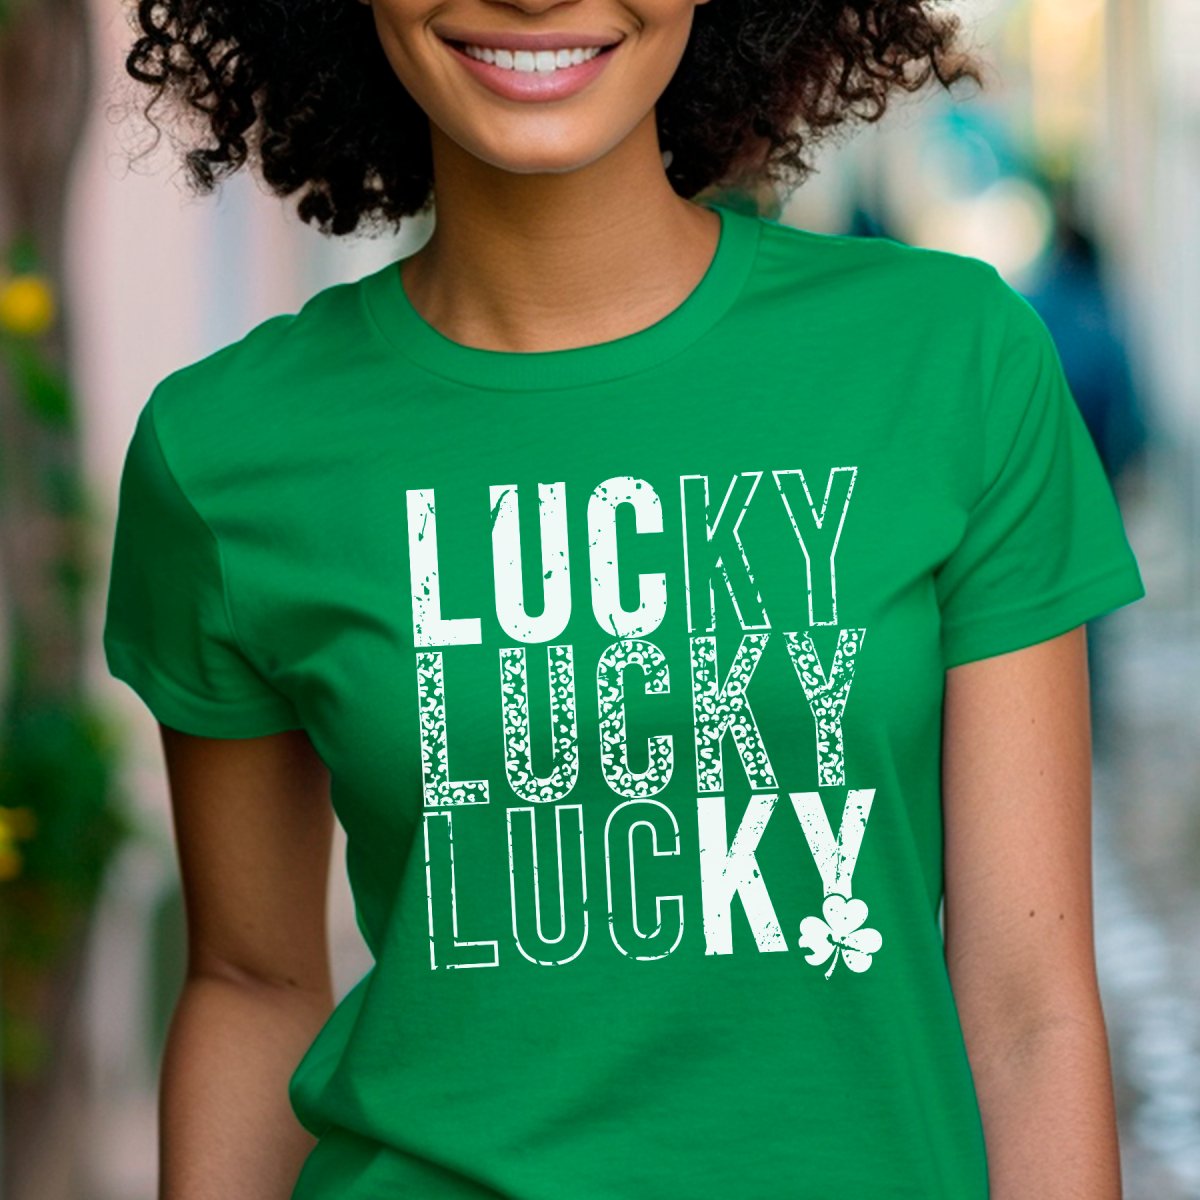 3 Times As Lucky St. Patrick's Day Premium T-Shirt - Embedded Designz